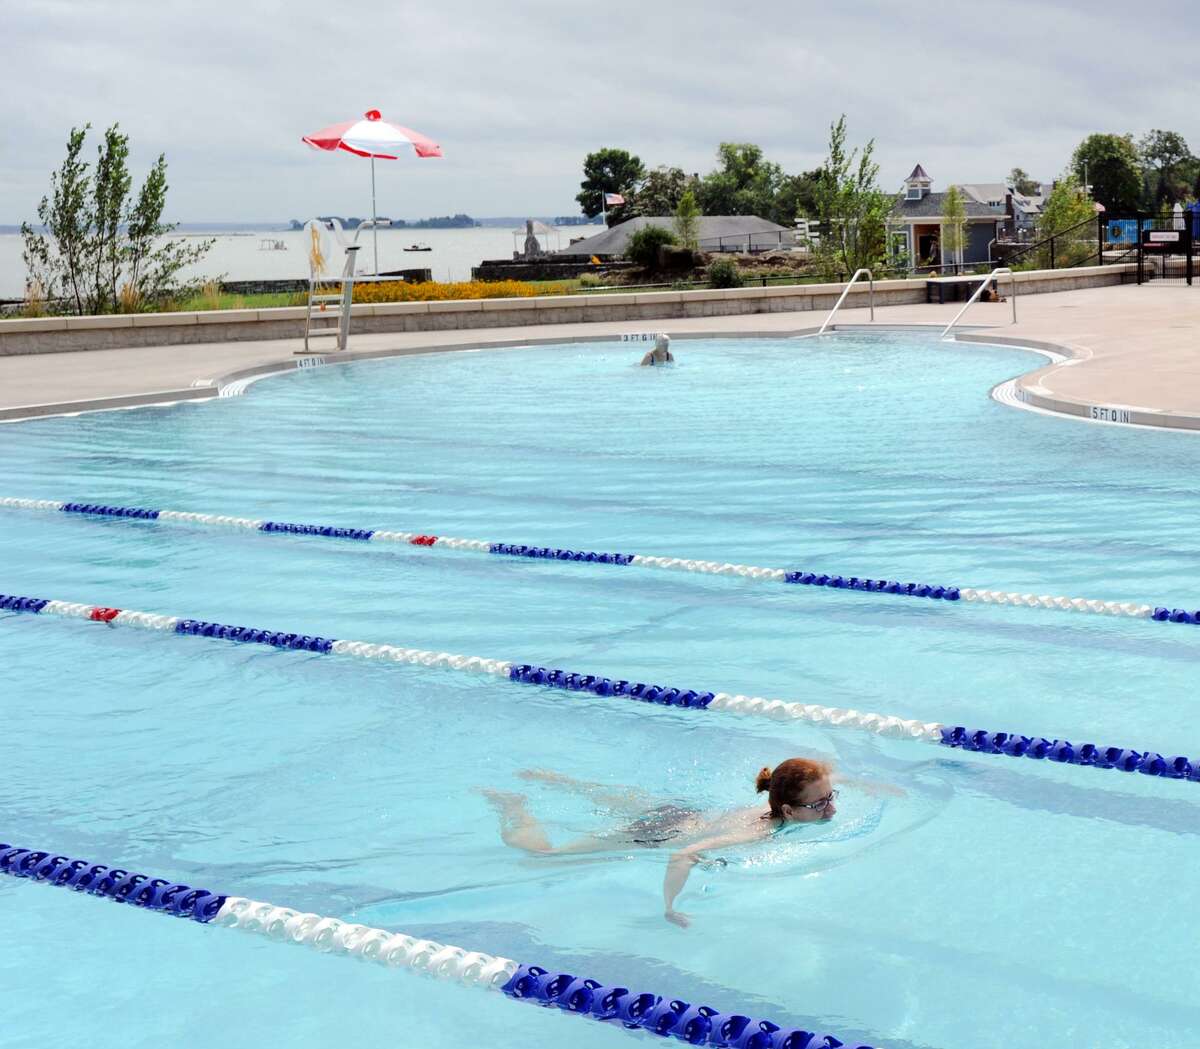 On one of the cooler days of the month, a woman, lower right, who gave her name as Laura, had the swimming lanes to herself in the Byram Park Pool in Greenwich, Conn., Friday, Aug. 31, 2018. Laura said about the pool "me and my family have used it a few times and it's great, really nice."